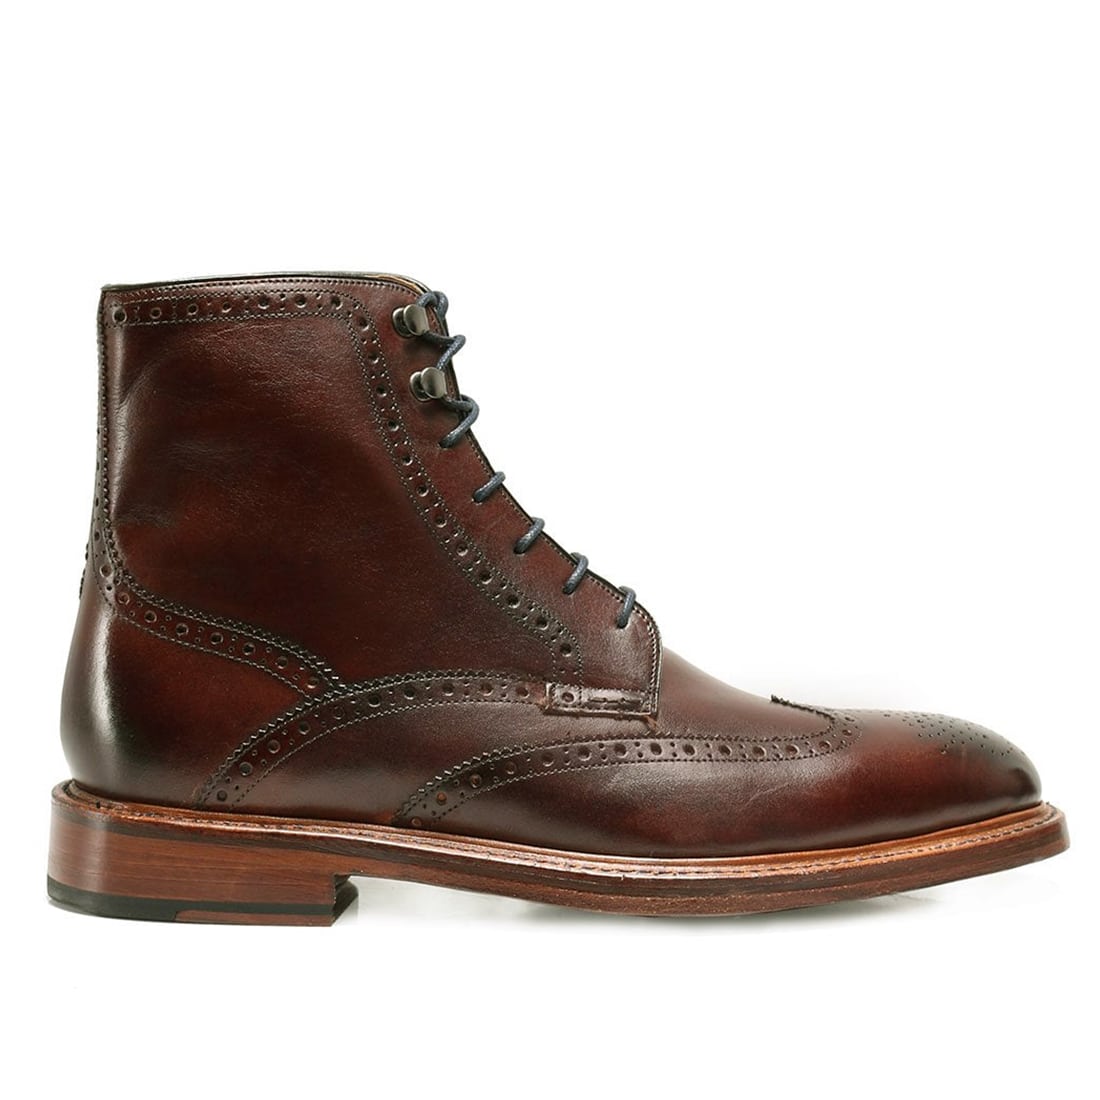 OLIVER SWEENEY Leather Carnforth Brogue Boots | Menswear Online